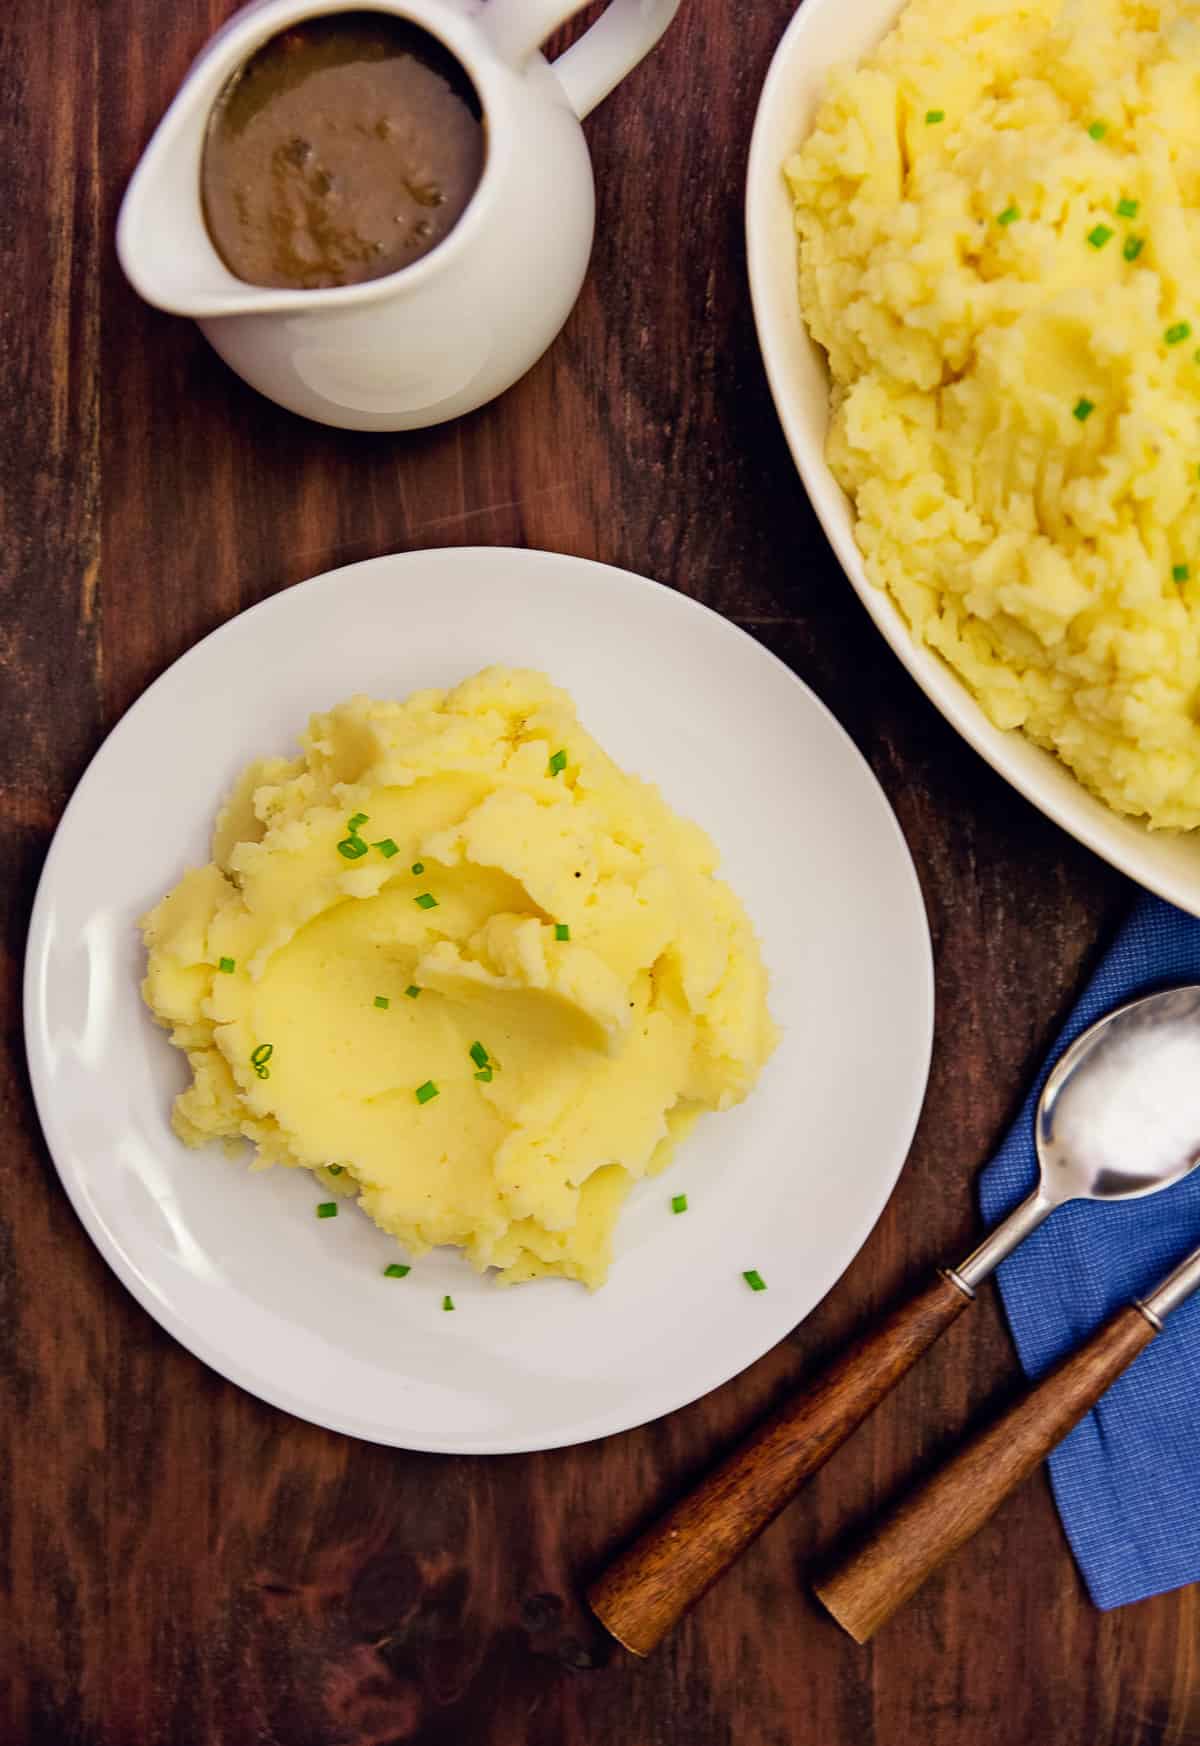 mashed potatoes, potatoes, super simple mashed potatoes, dinner, lunch, side, gluten free, vegan, vegetarian, whole food plant based, wfpb, recipe, oil free, refined sugar free, easy recipe, vegan recipe, gluten free recipe, vegetarian recipe, almond milk, vegan mashed potatoes, vegetarian mashed potatoes, whole food plant based mashed potatoes, wfpb mashed potatoes, vegan potatoes, vegetarian potatoes, whole food plant based potatoes, wfpb potatoes, quick side, side dish, gluten free side dish,